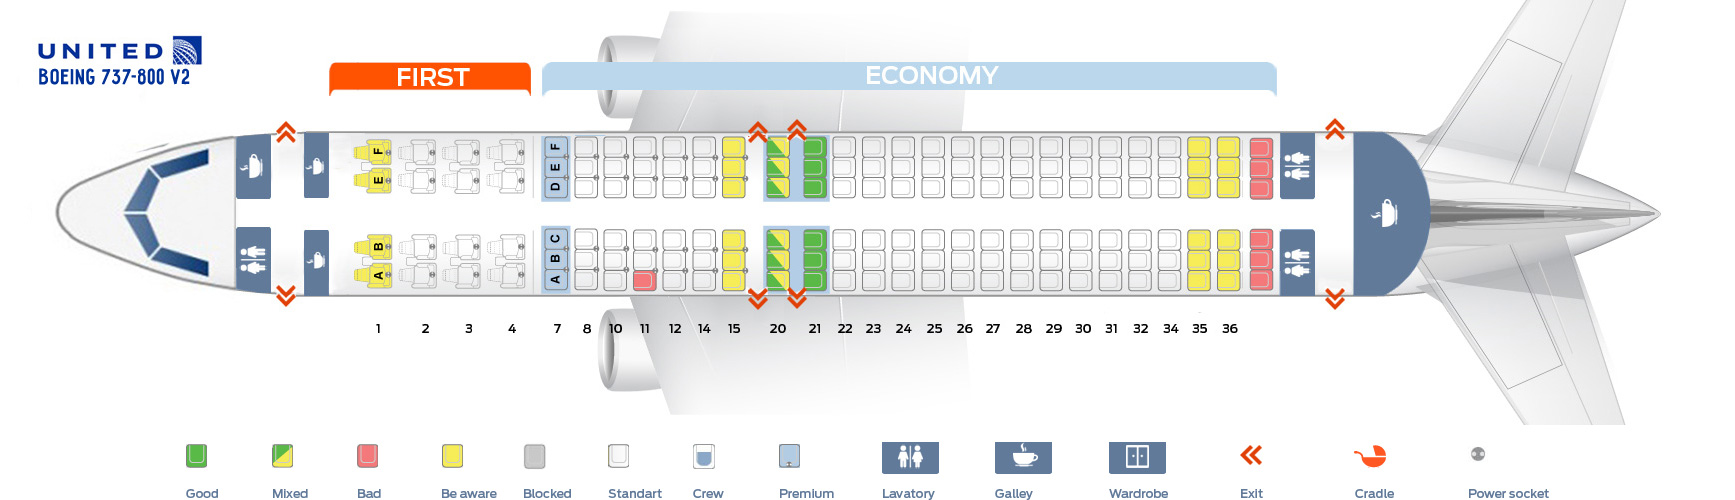 Seat_map_United_Airlines_Boeing_737_800_v2